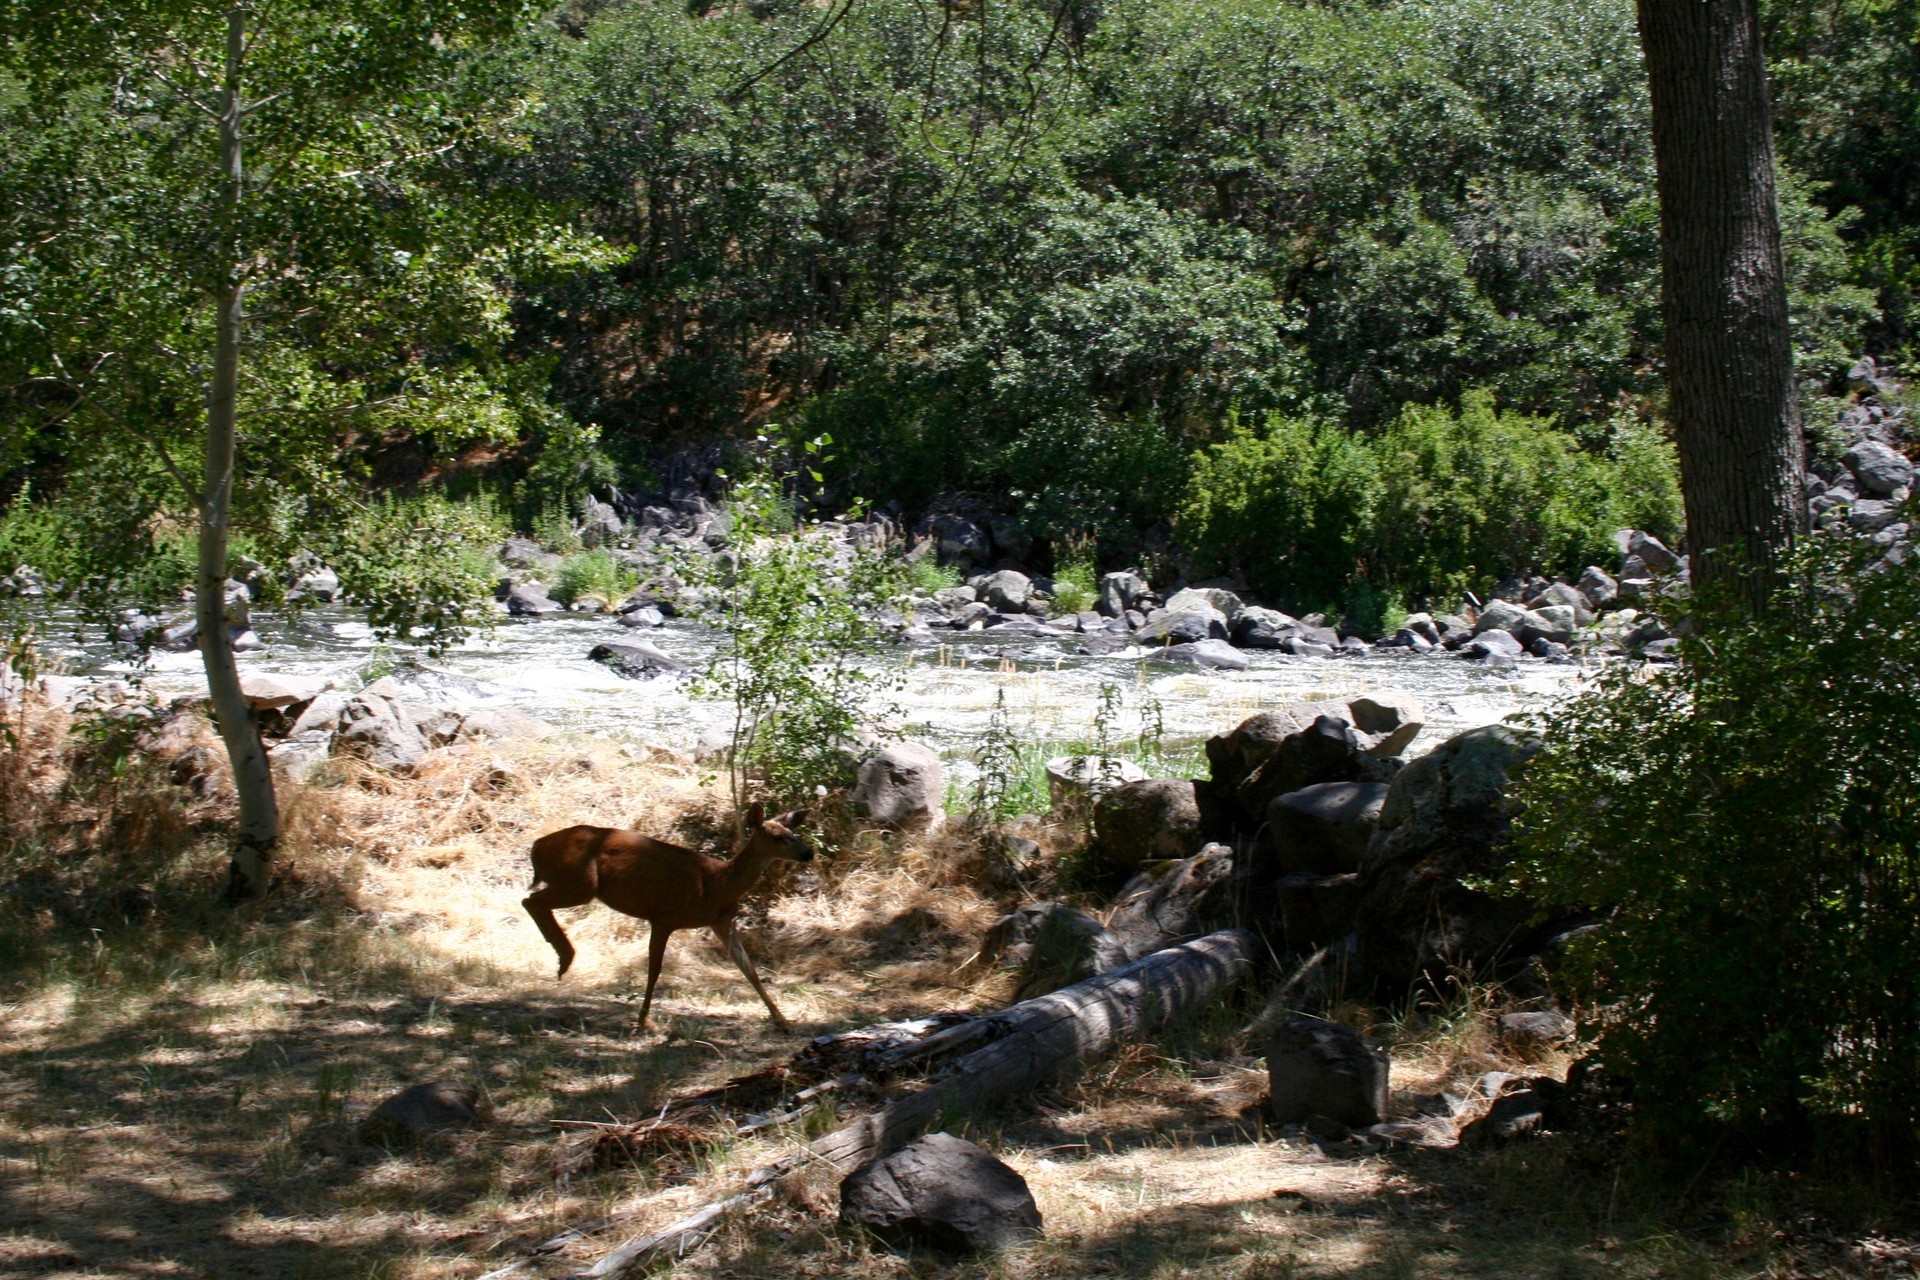 A nature shot within the forest with a running stream in the background along with wild deer running in the foreground.